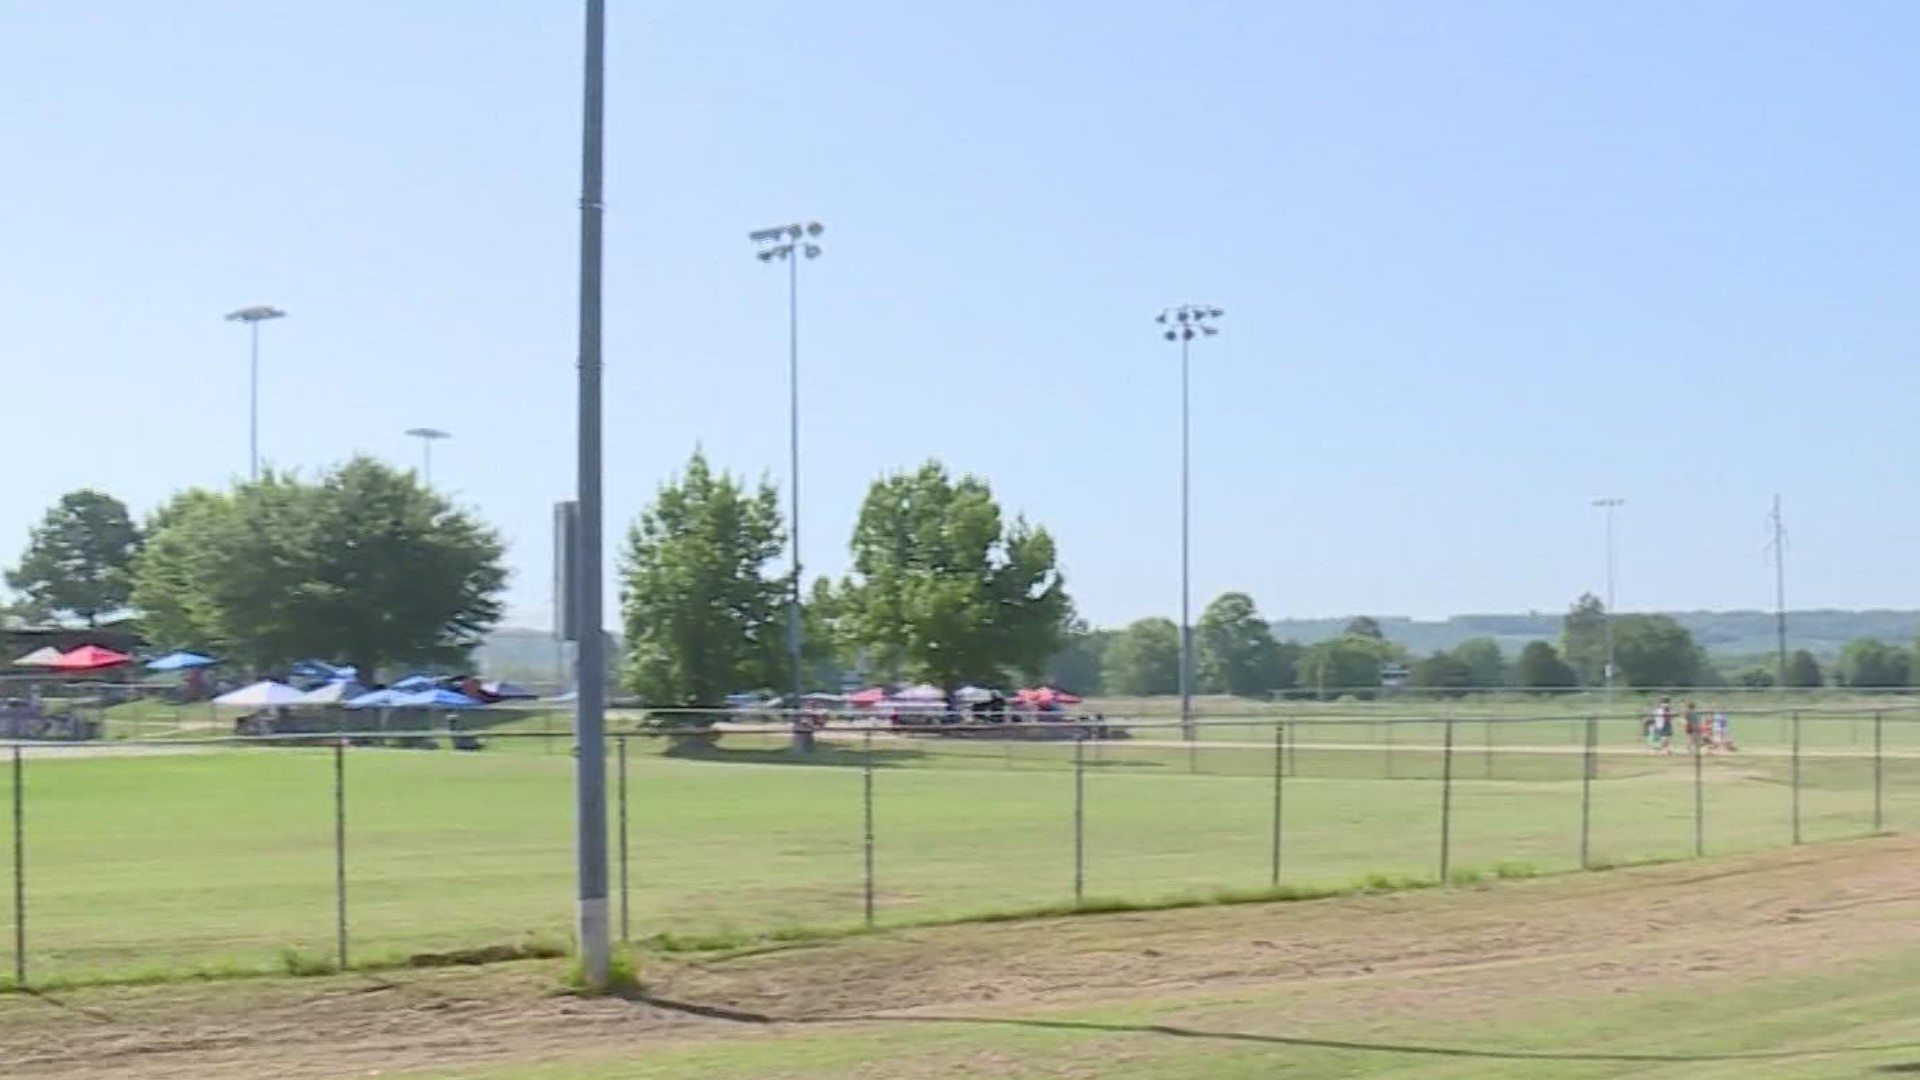 A little more than $3 million was approved to make massive improvements to the softball diamonds at Ben Geren Park that date back 50 years.